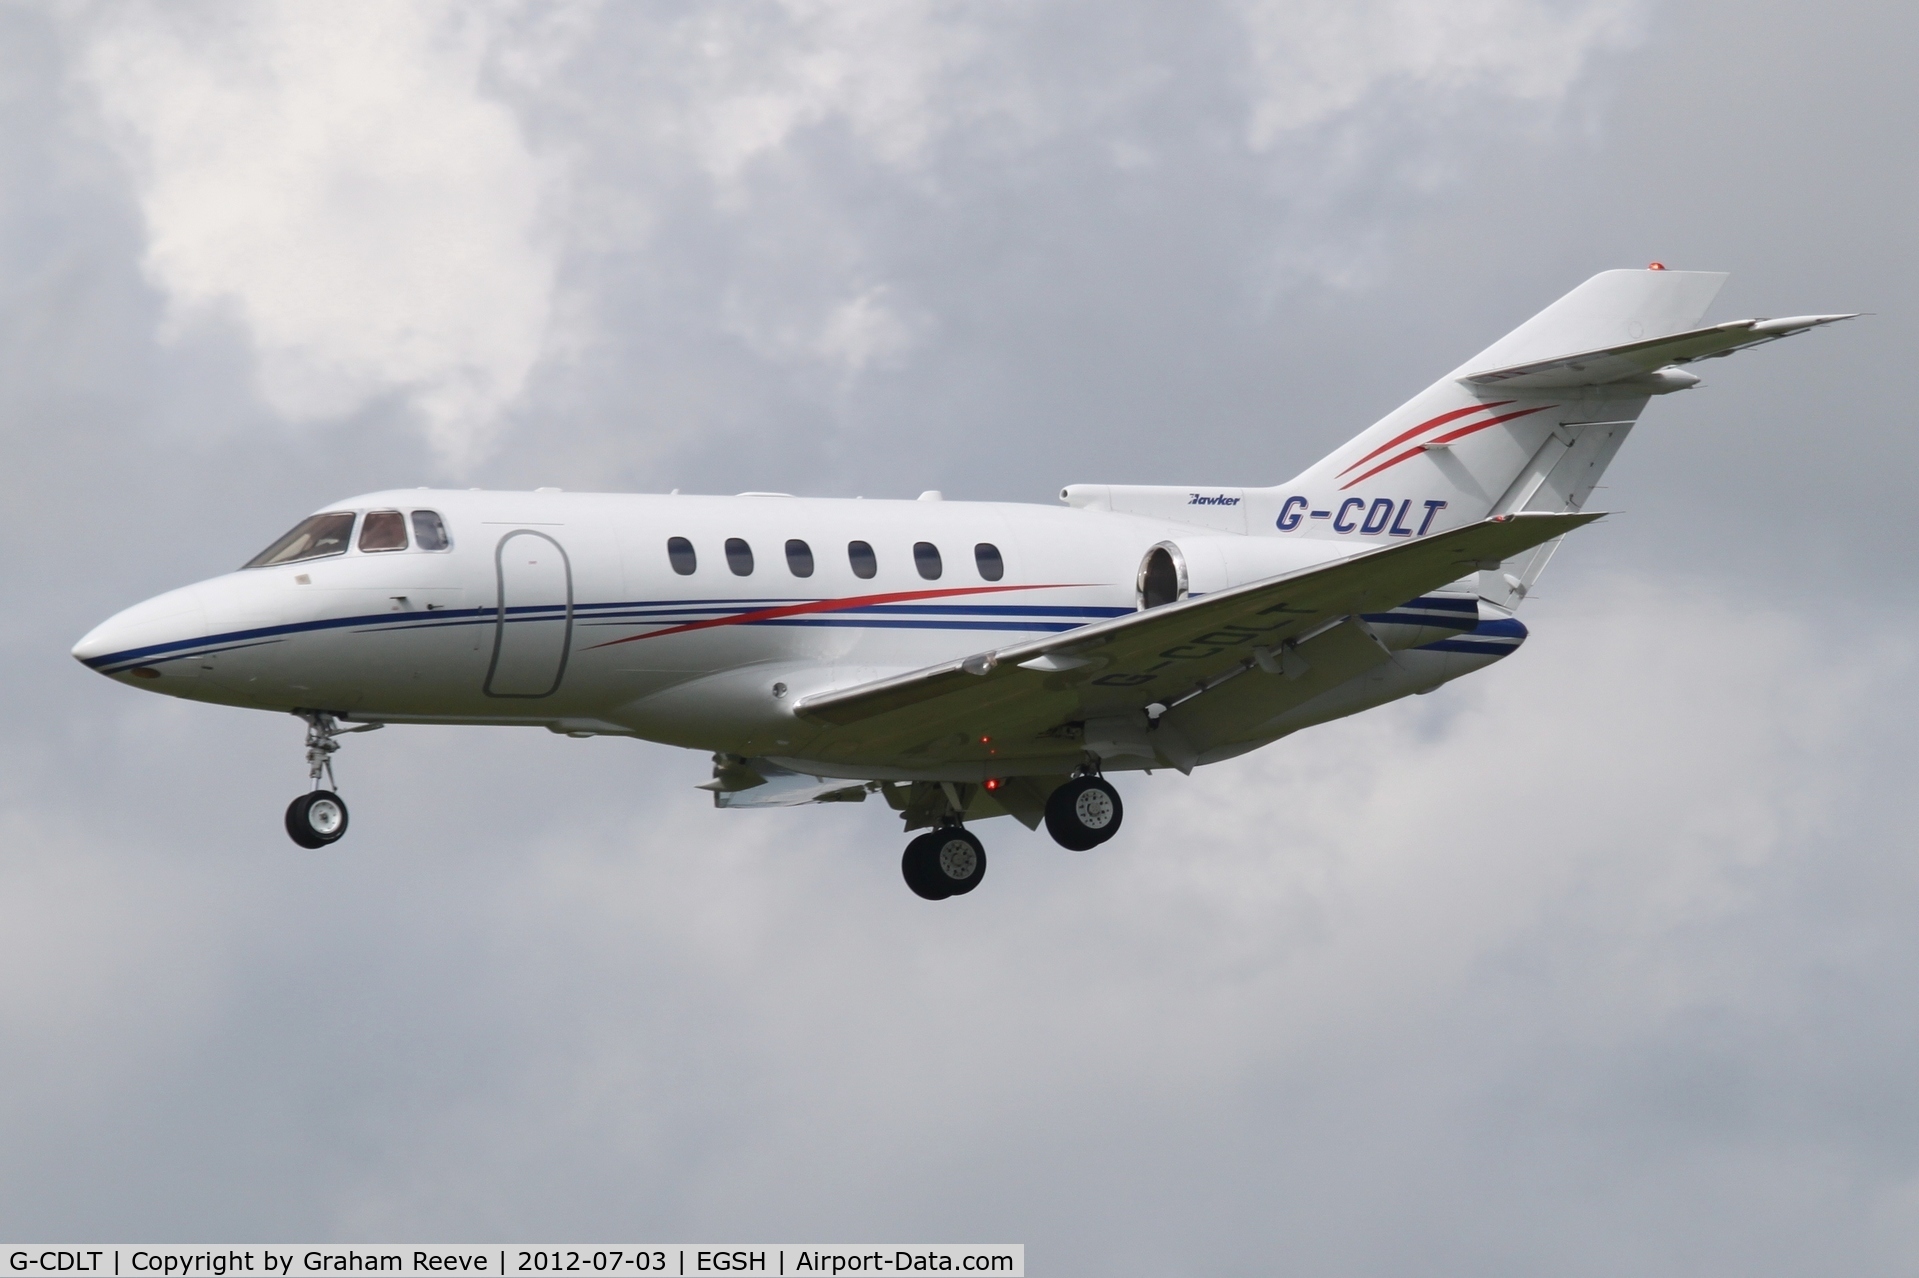 G-CDLT, 2005 Raytheon Hawker 800XP C/N 258710, About to touch down.